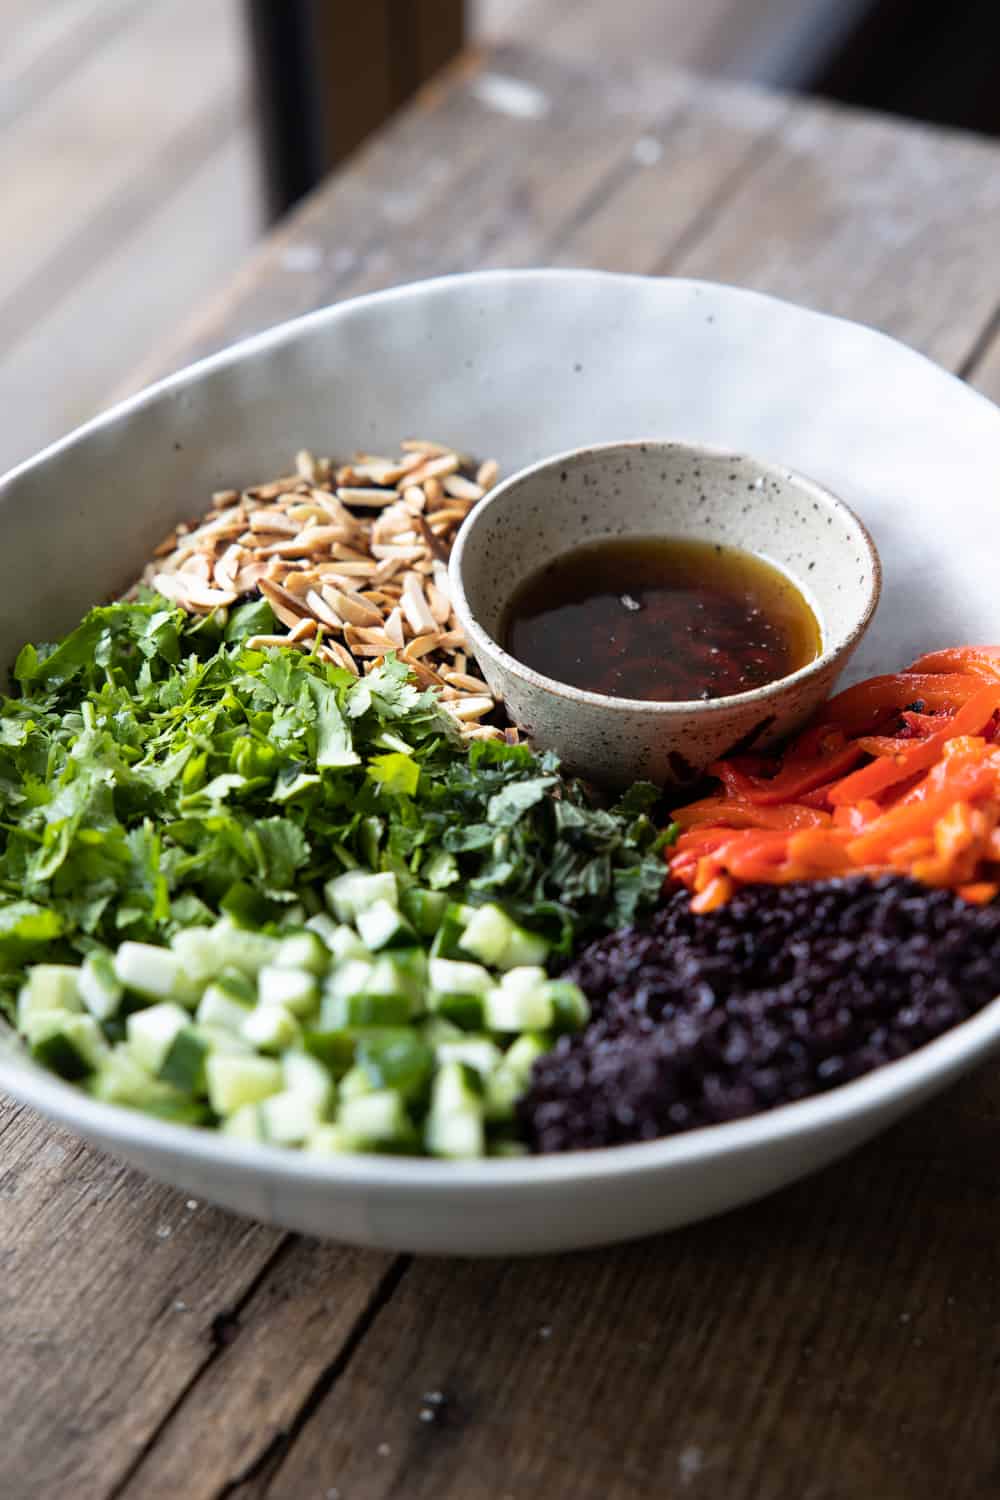 Black rice salad ingredients all in a large bowl.